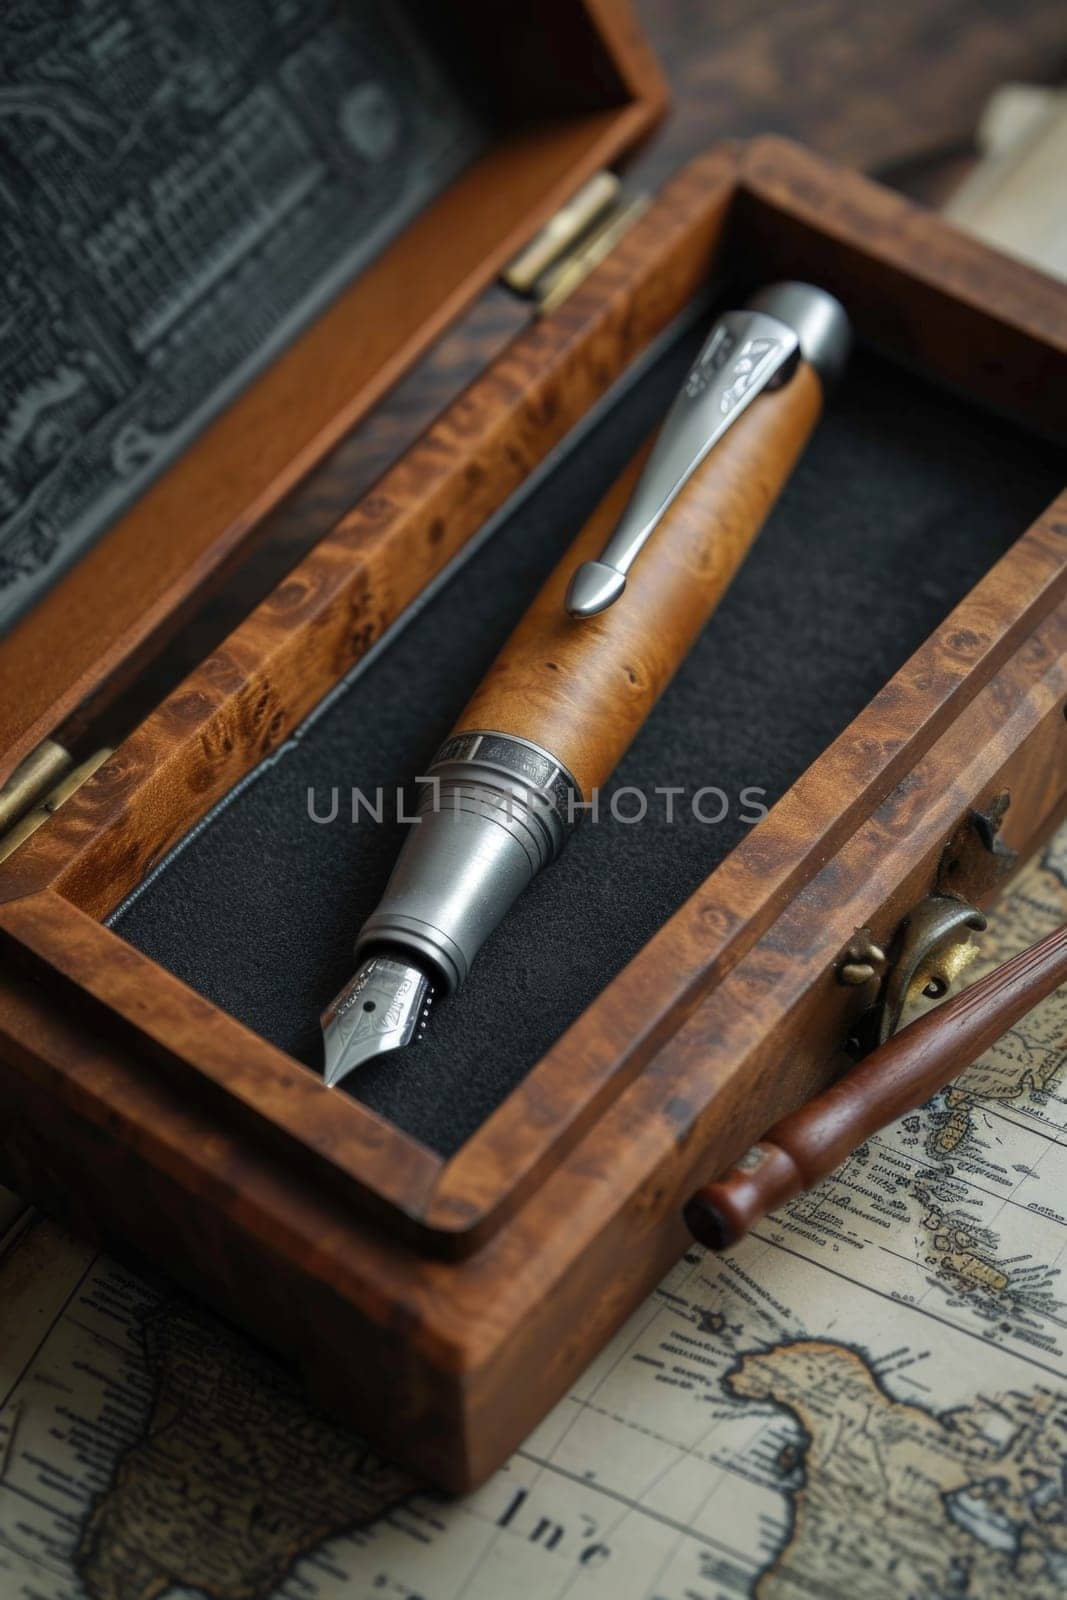 stylish fountain pen with a stylish box on the table by Lobachad